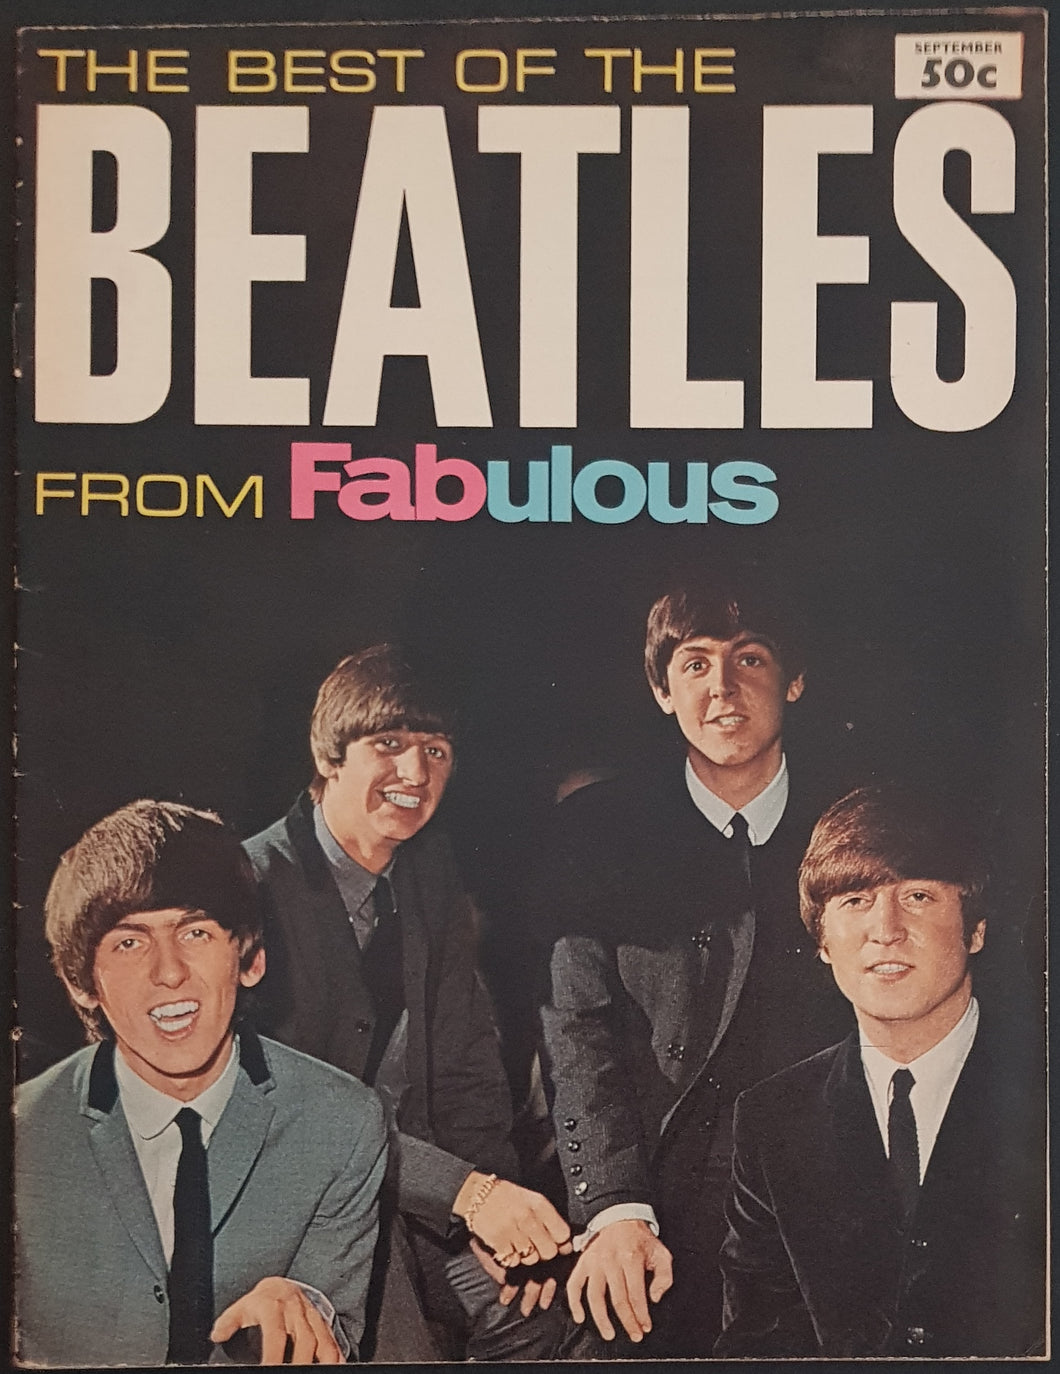 Beatles - The Best Of The Beatles From Fabulous